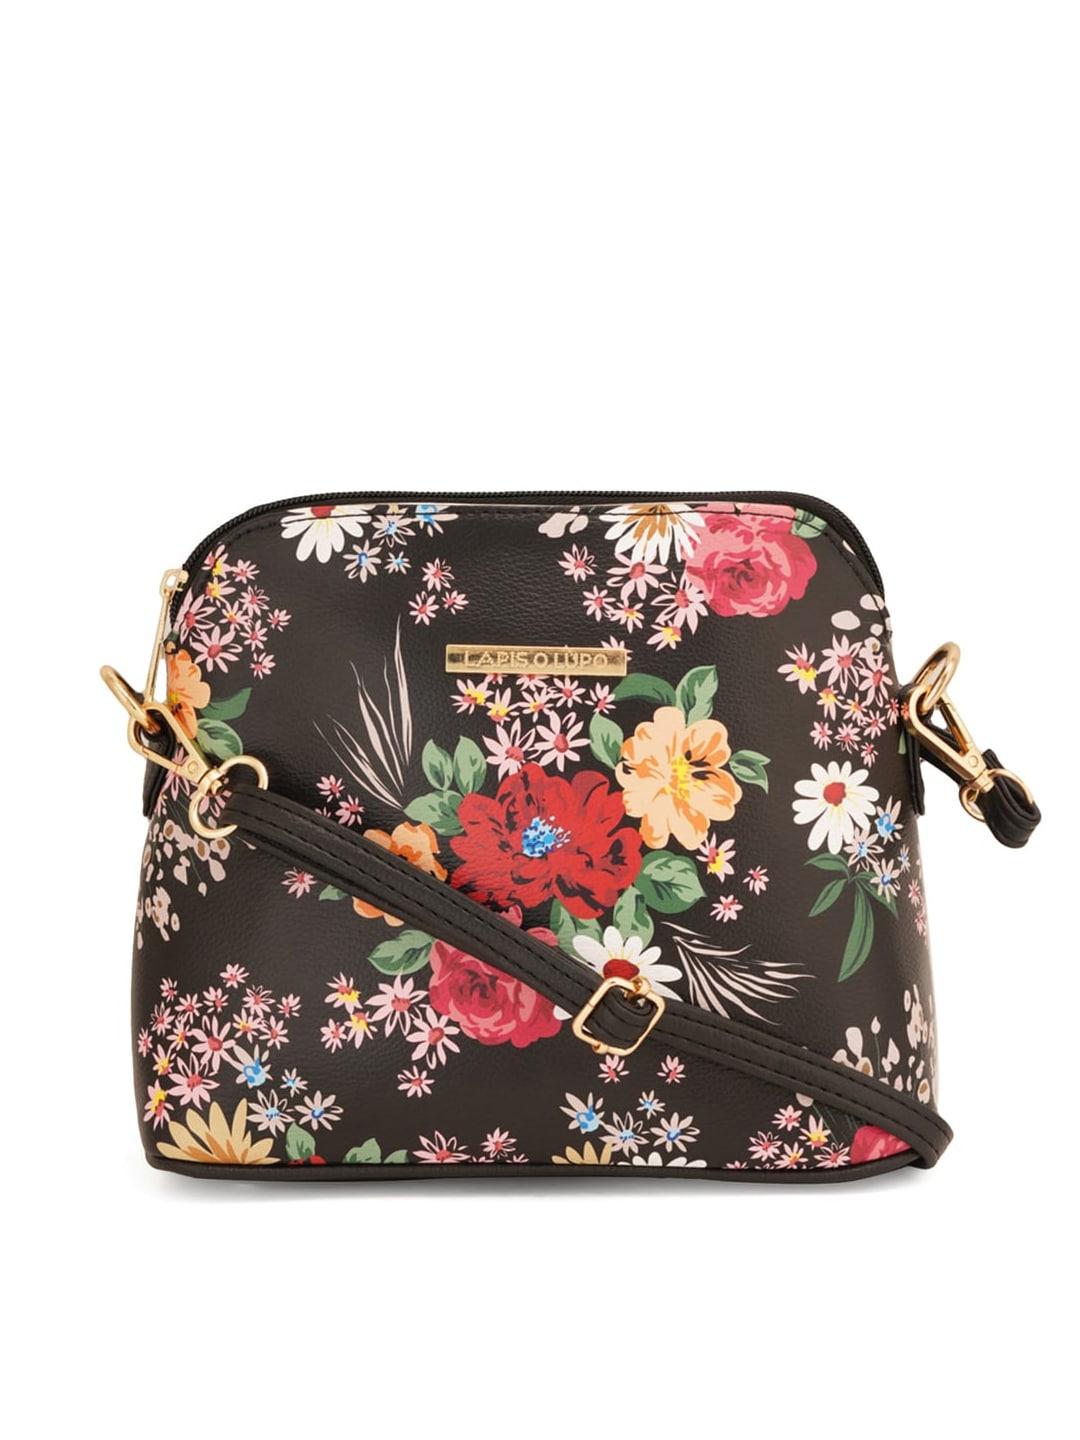 Lapis O Lupo Women Floral Printed Structured Sling Bag